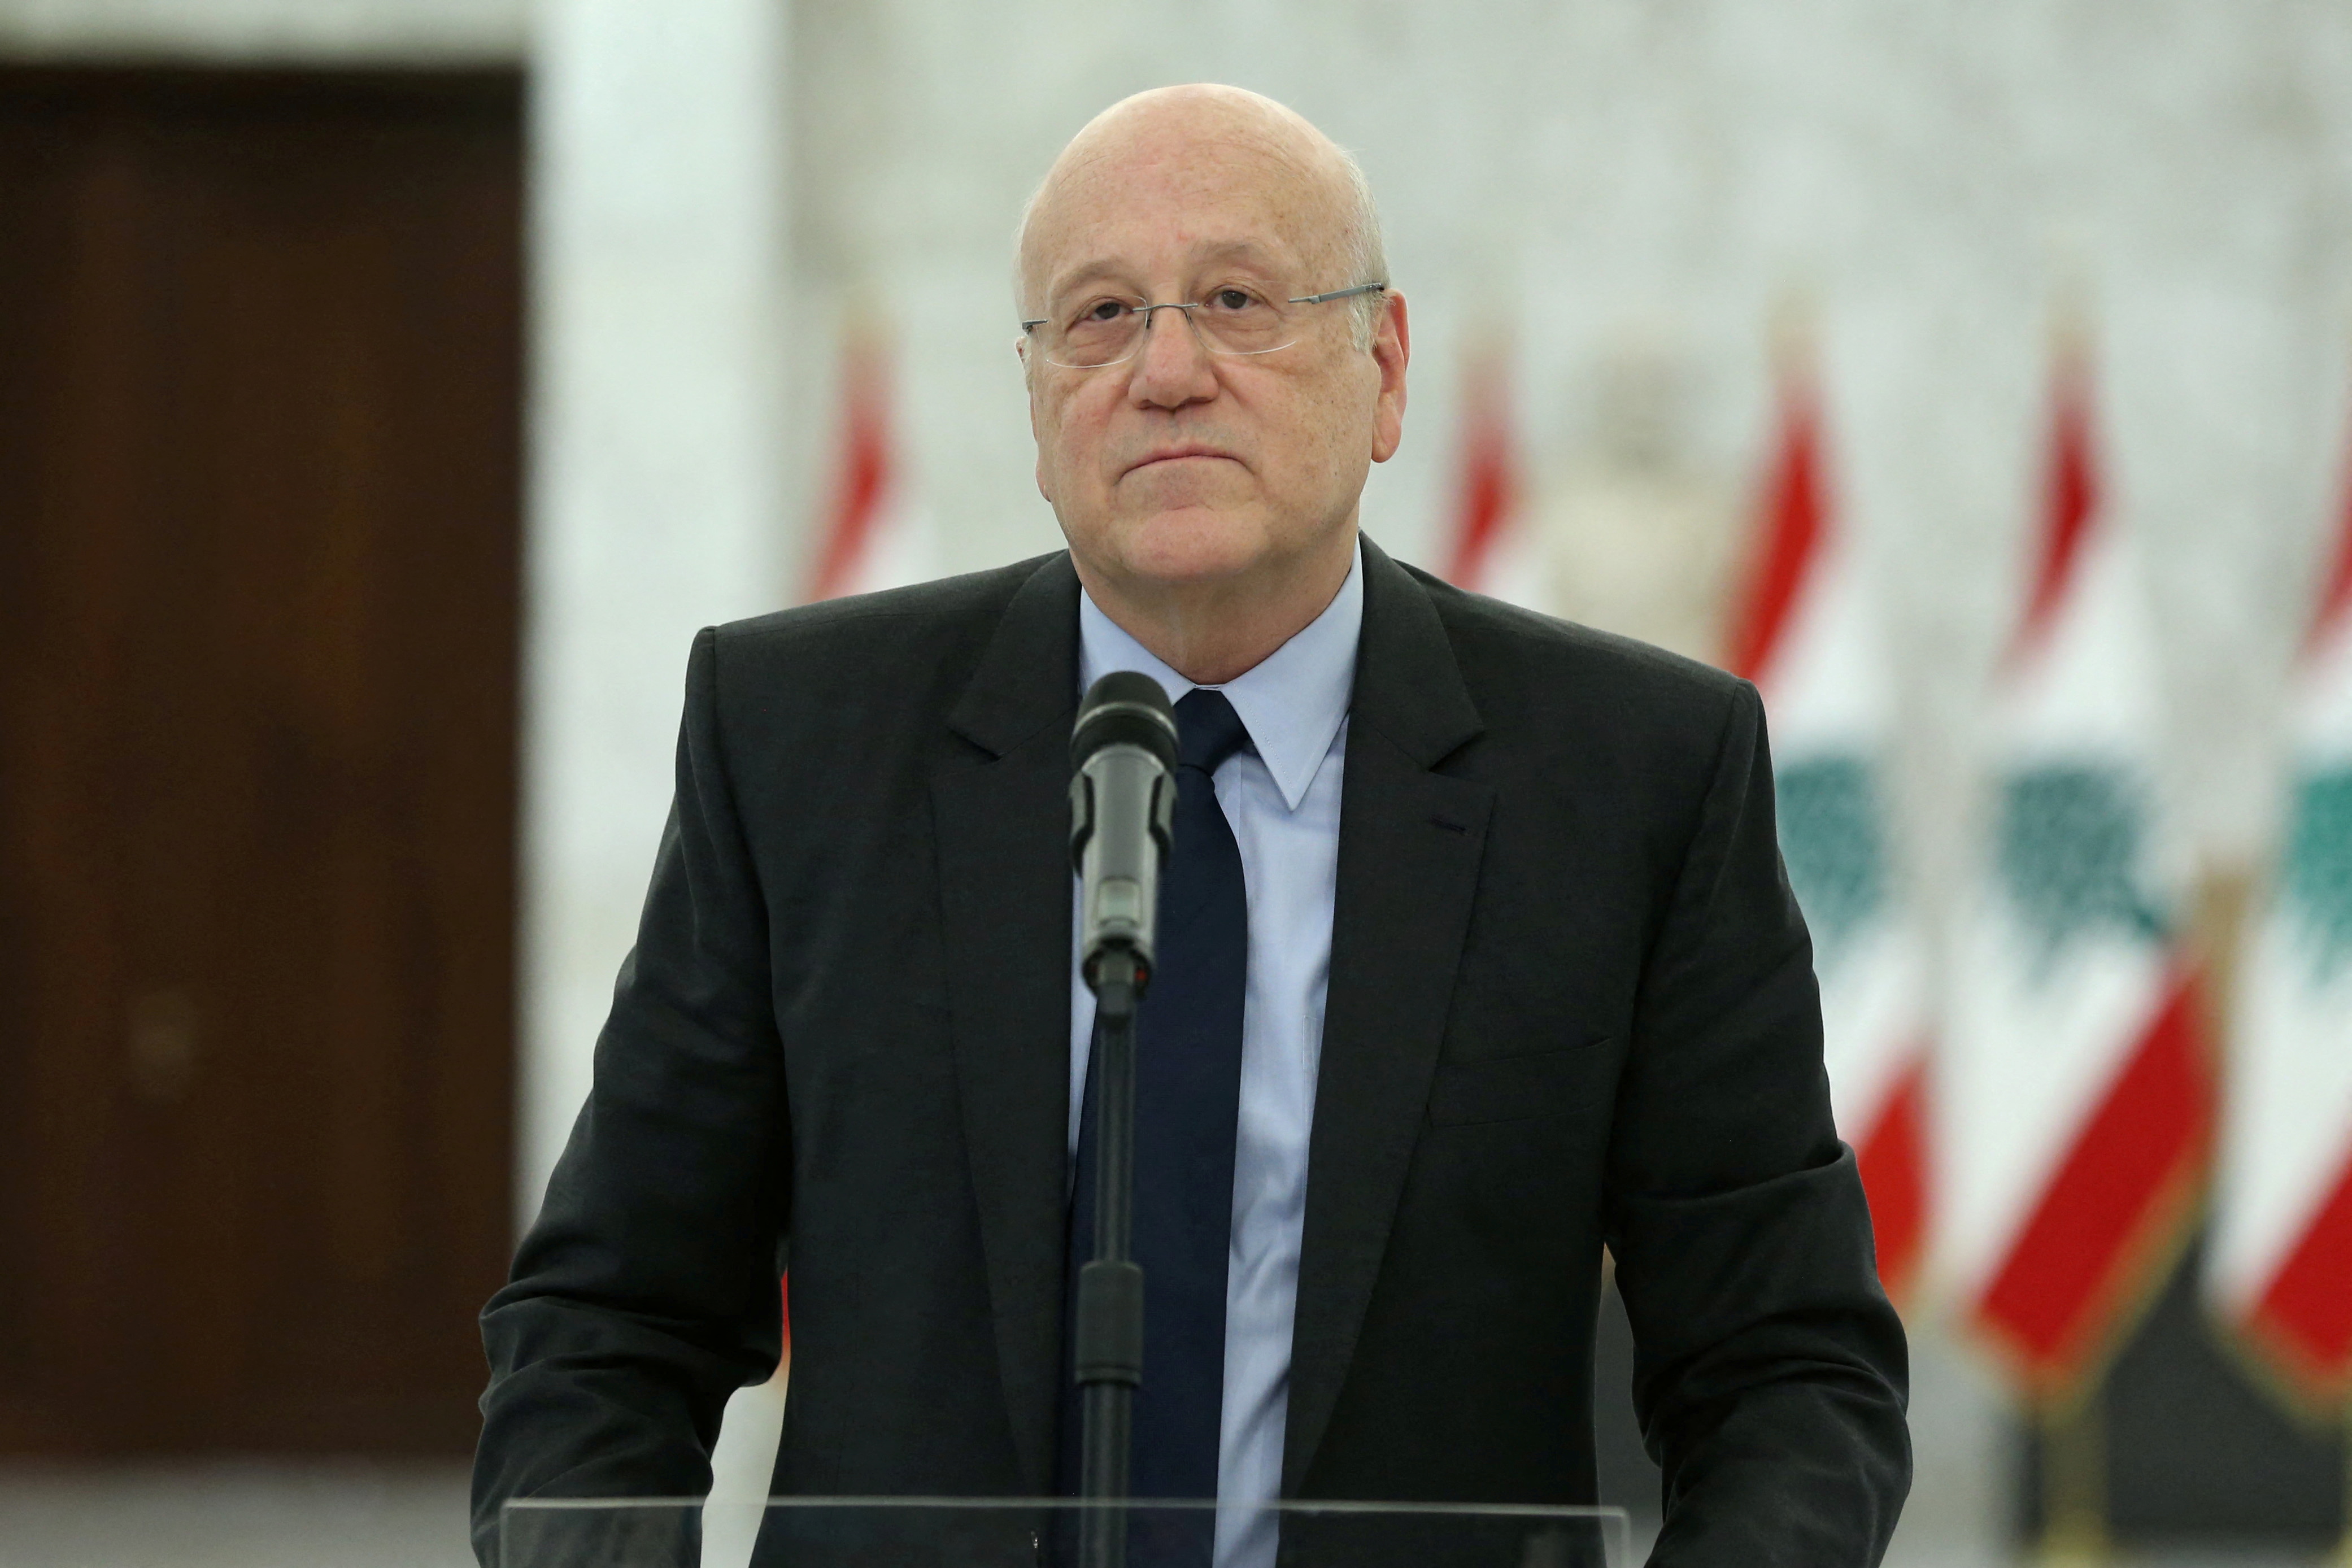 Lebanon's Prime Minister-Designate Najib Mikati speaks after meeting with Lebanon's President Michel Aoun, at the presidential palace in Baabda